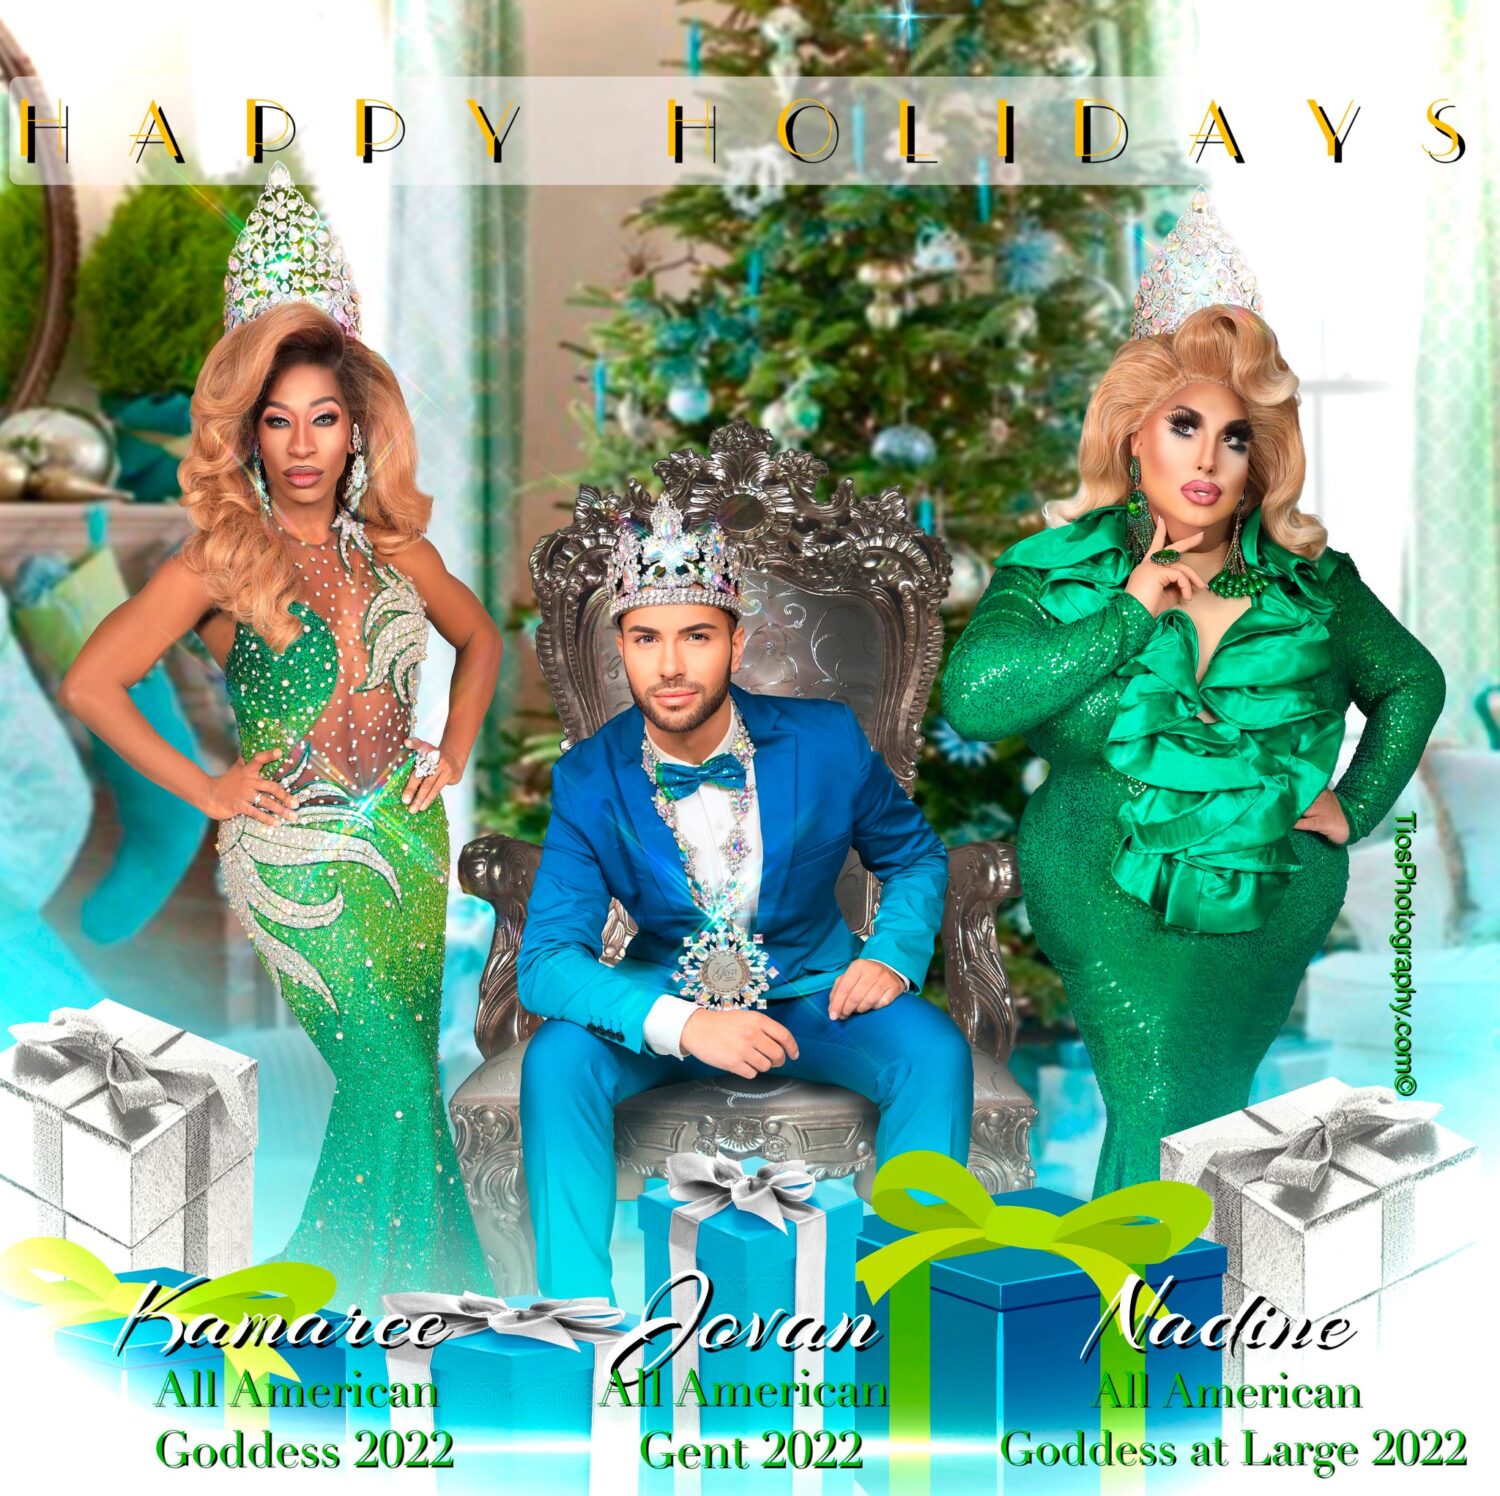 Kamaree Williams, Jovan Cardin IV and Nadine Hughes | 2022 Promotional Photo of the All American Goddess and Gent Court